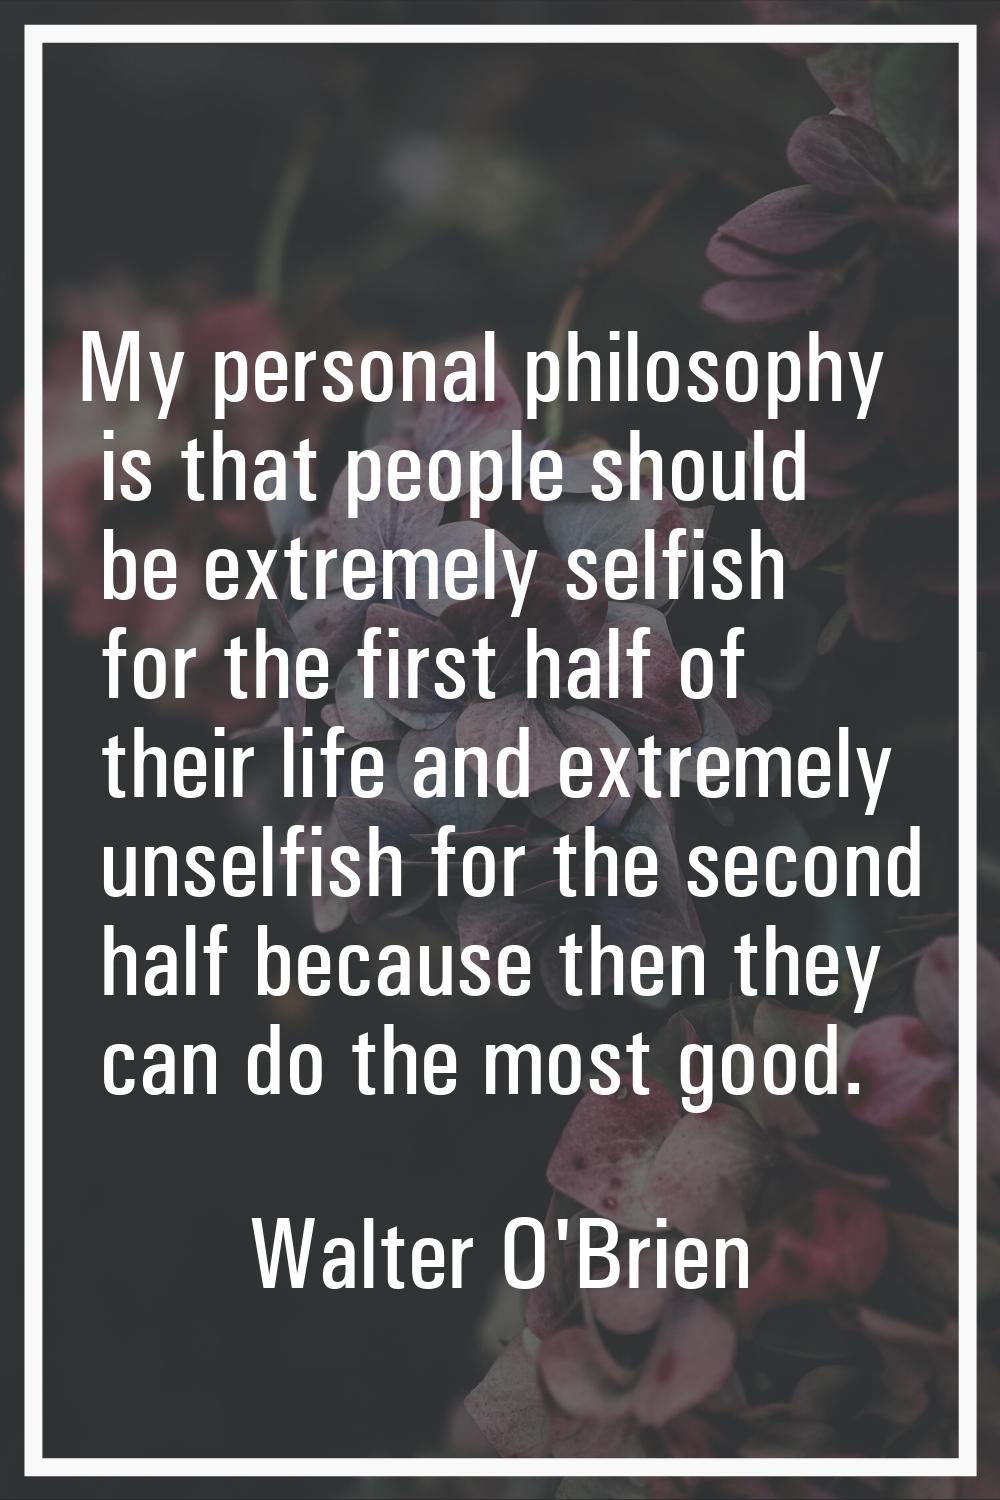 My personal philosophy is that people should be extremely selfish for the first half of their life 